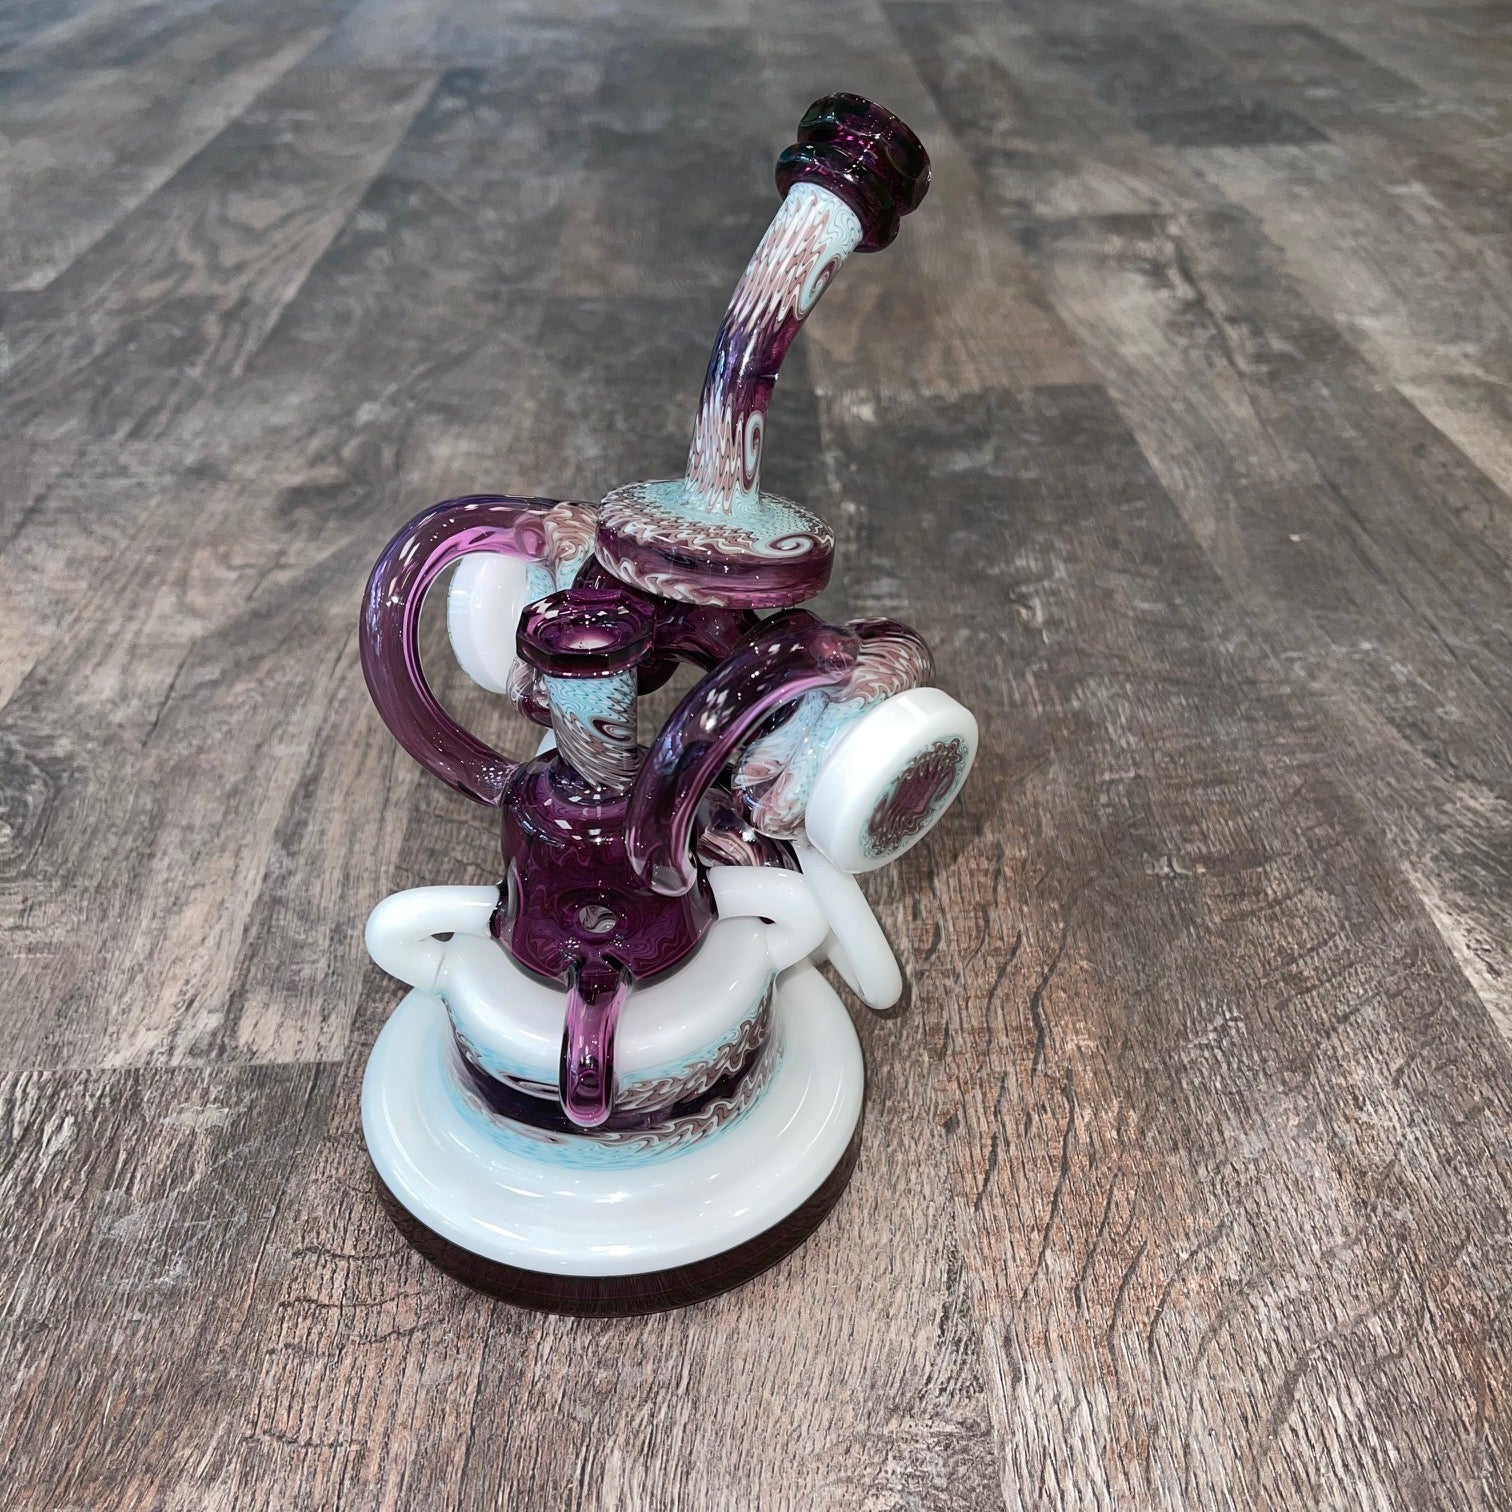 Michael Ray Royal Jelly Recycler + 1300 pelican